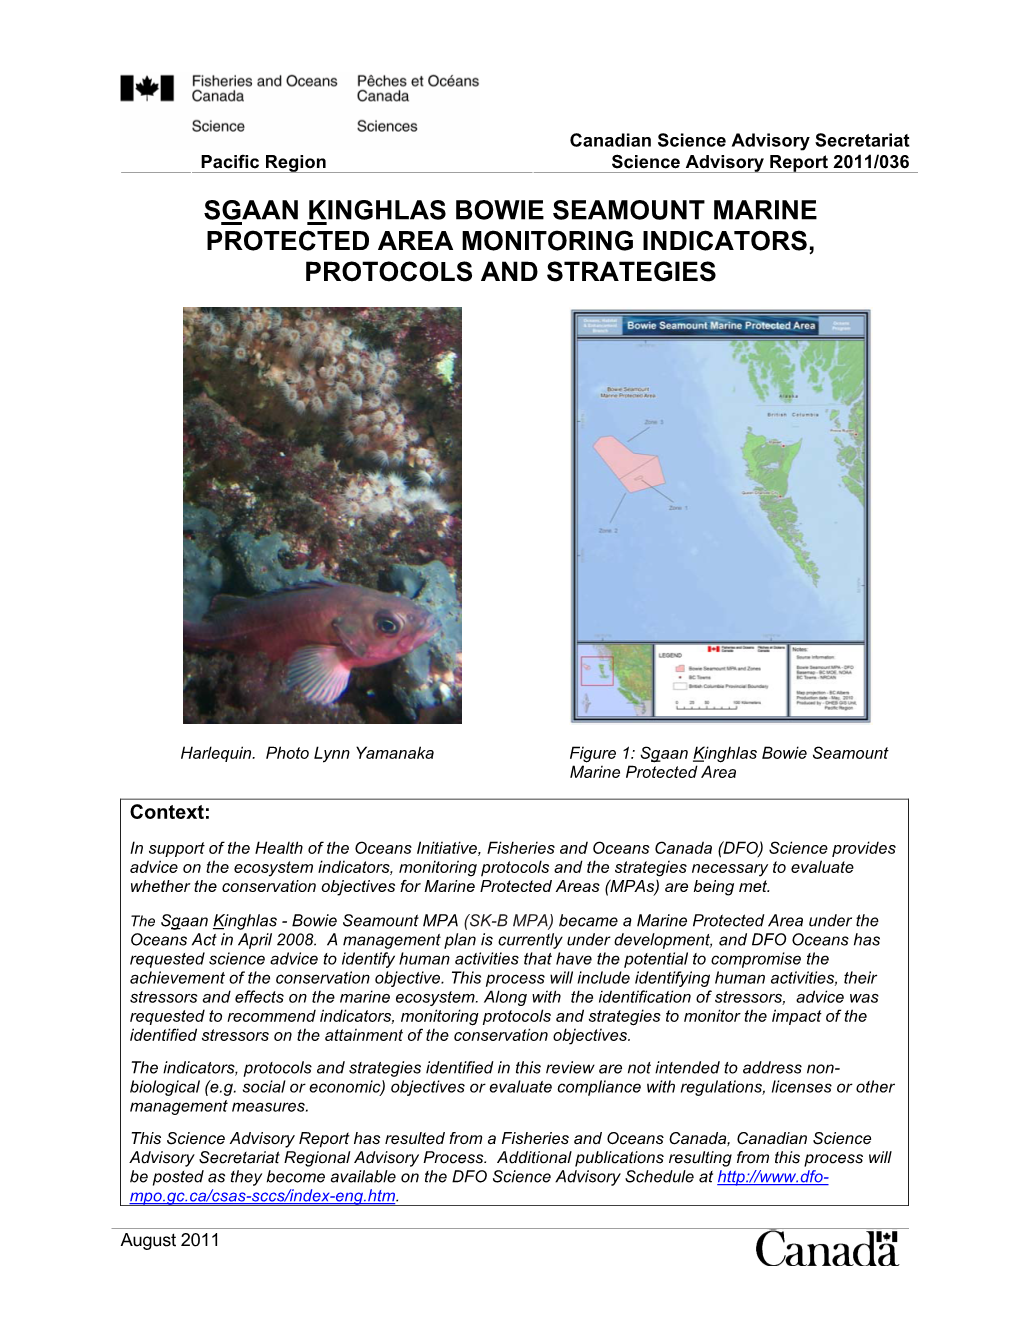 Sgaan Kinghlas Bowie Seamount Marine Protected Area Monitoring Indicators, Protocols and Strategies